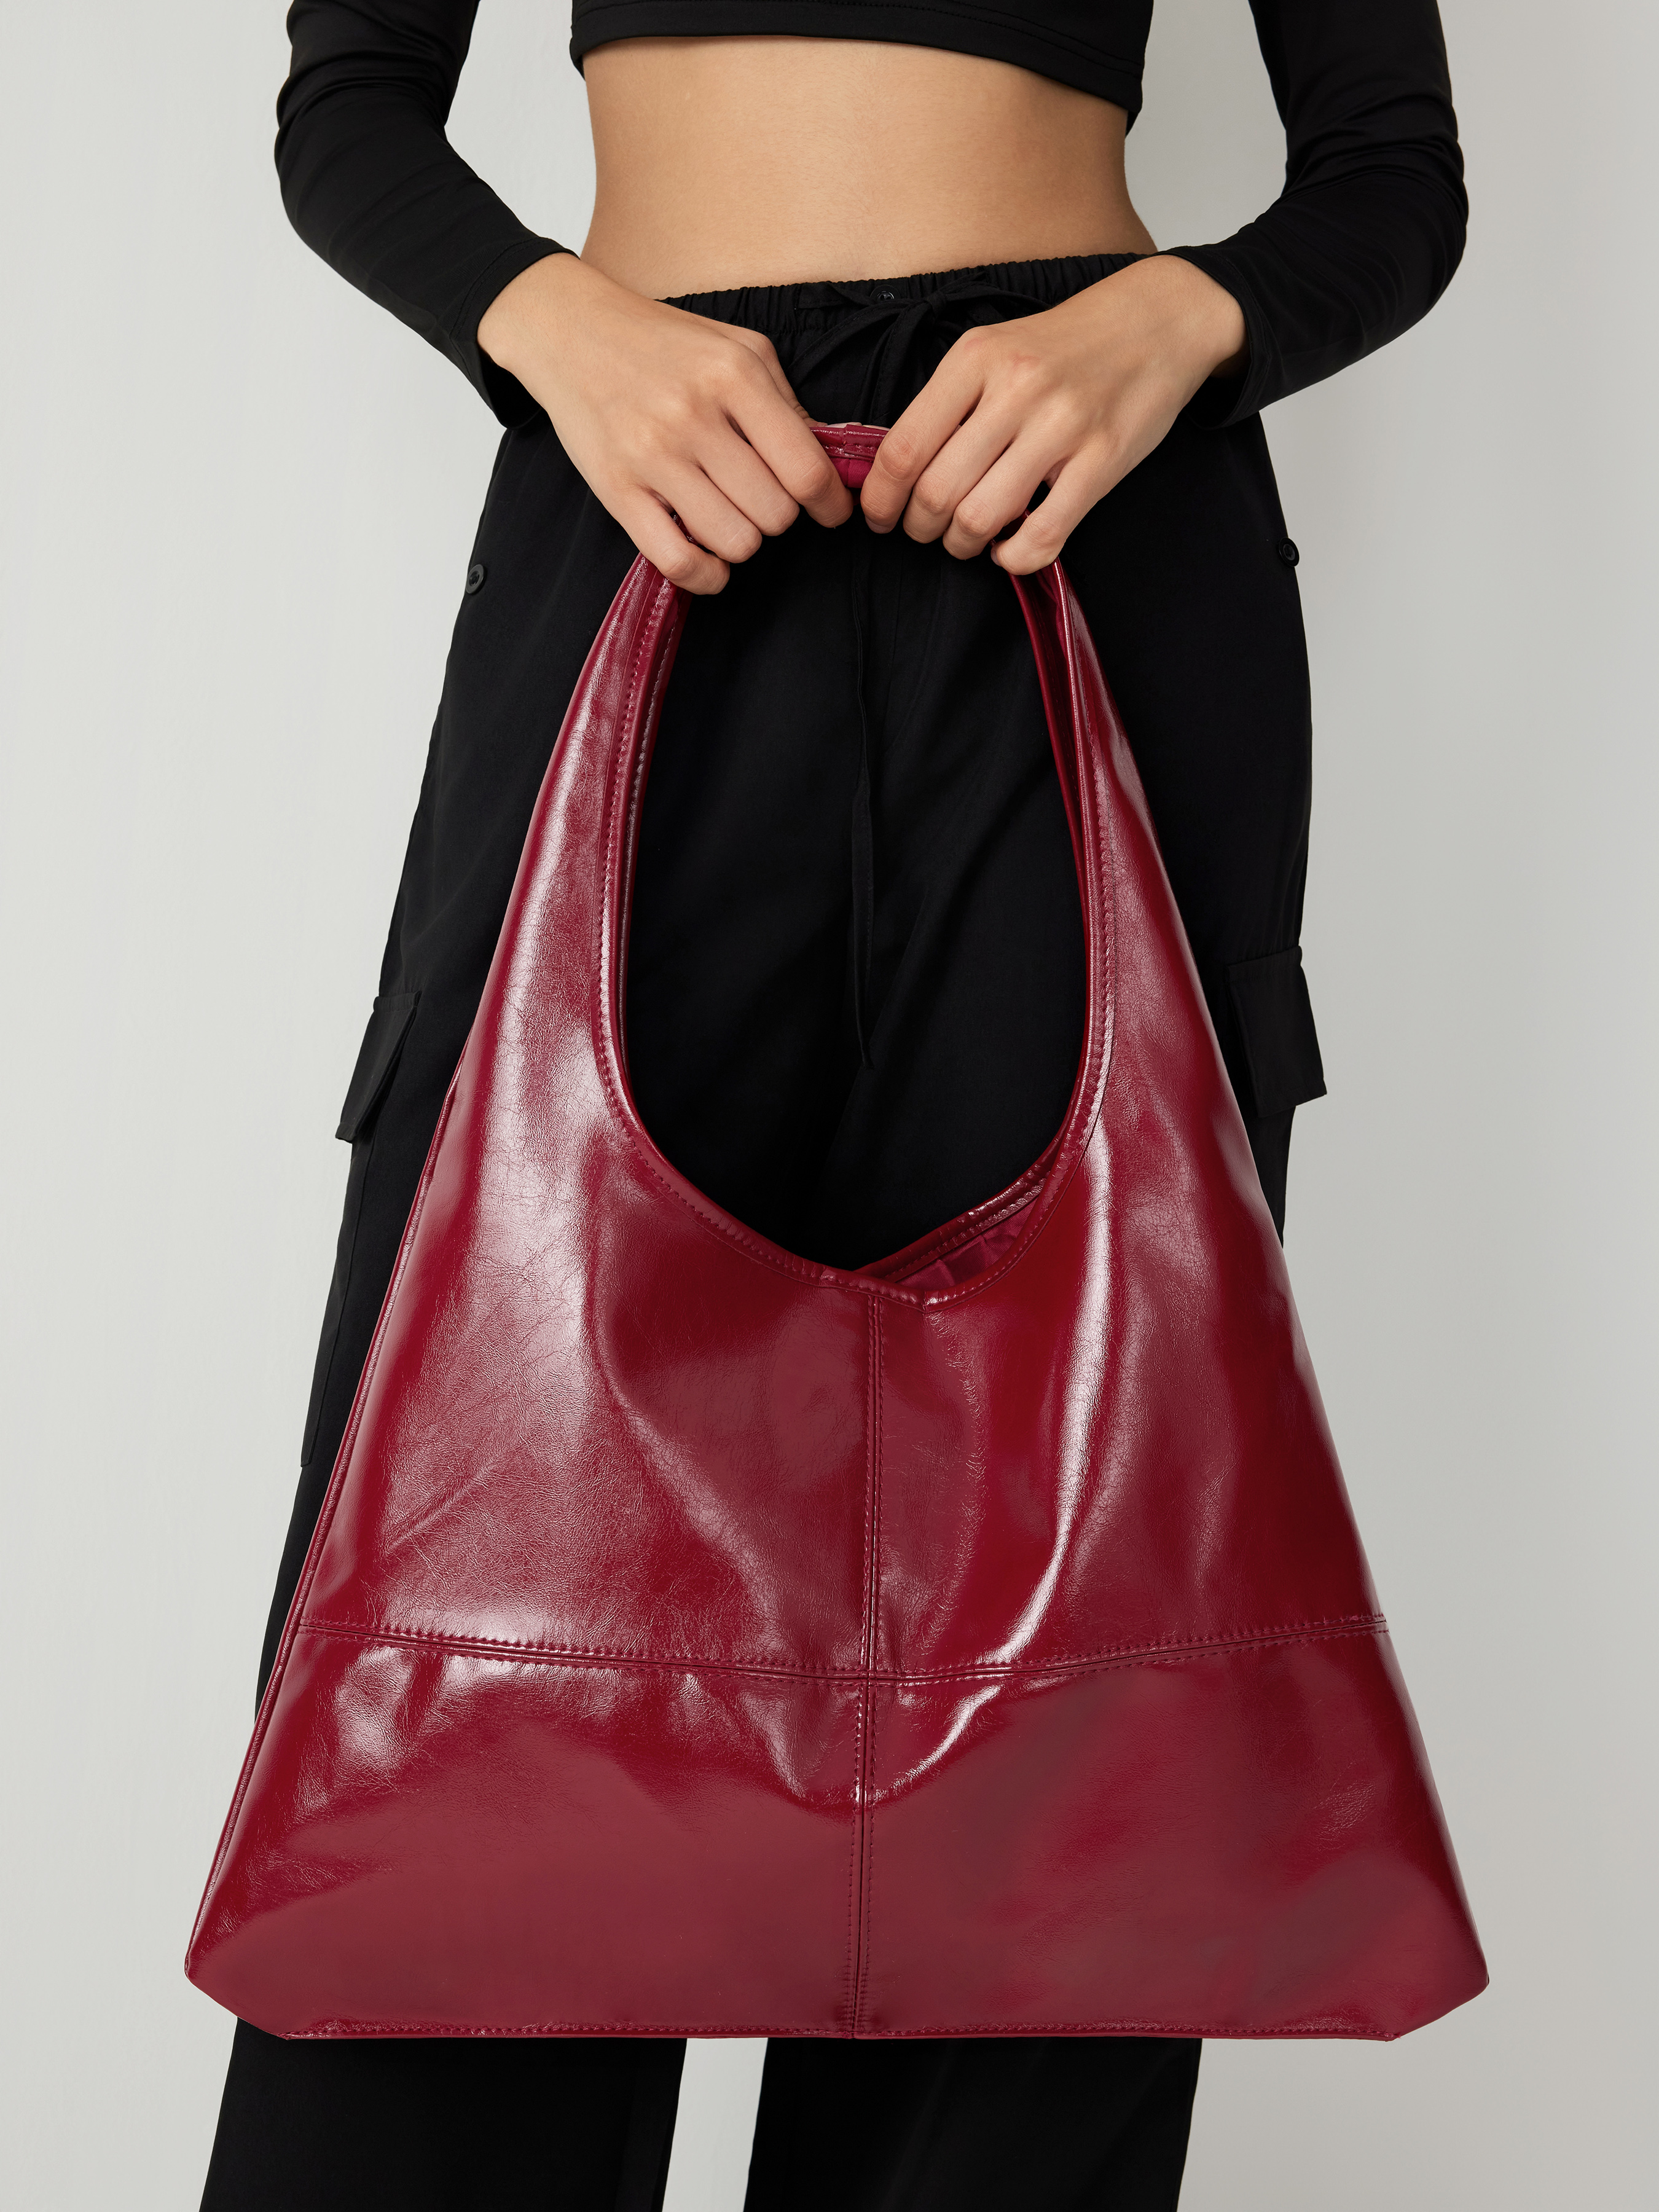 Solid Faux Leather Large Capacity Tote Shopper Bag - Cider